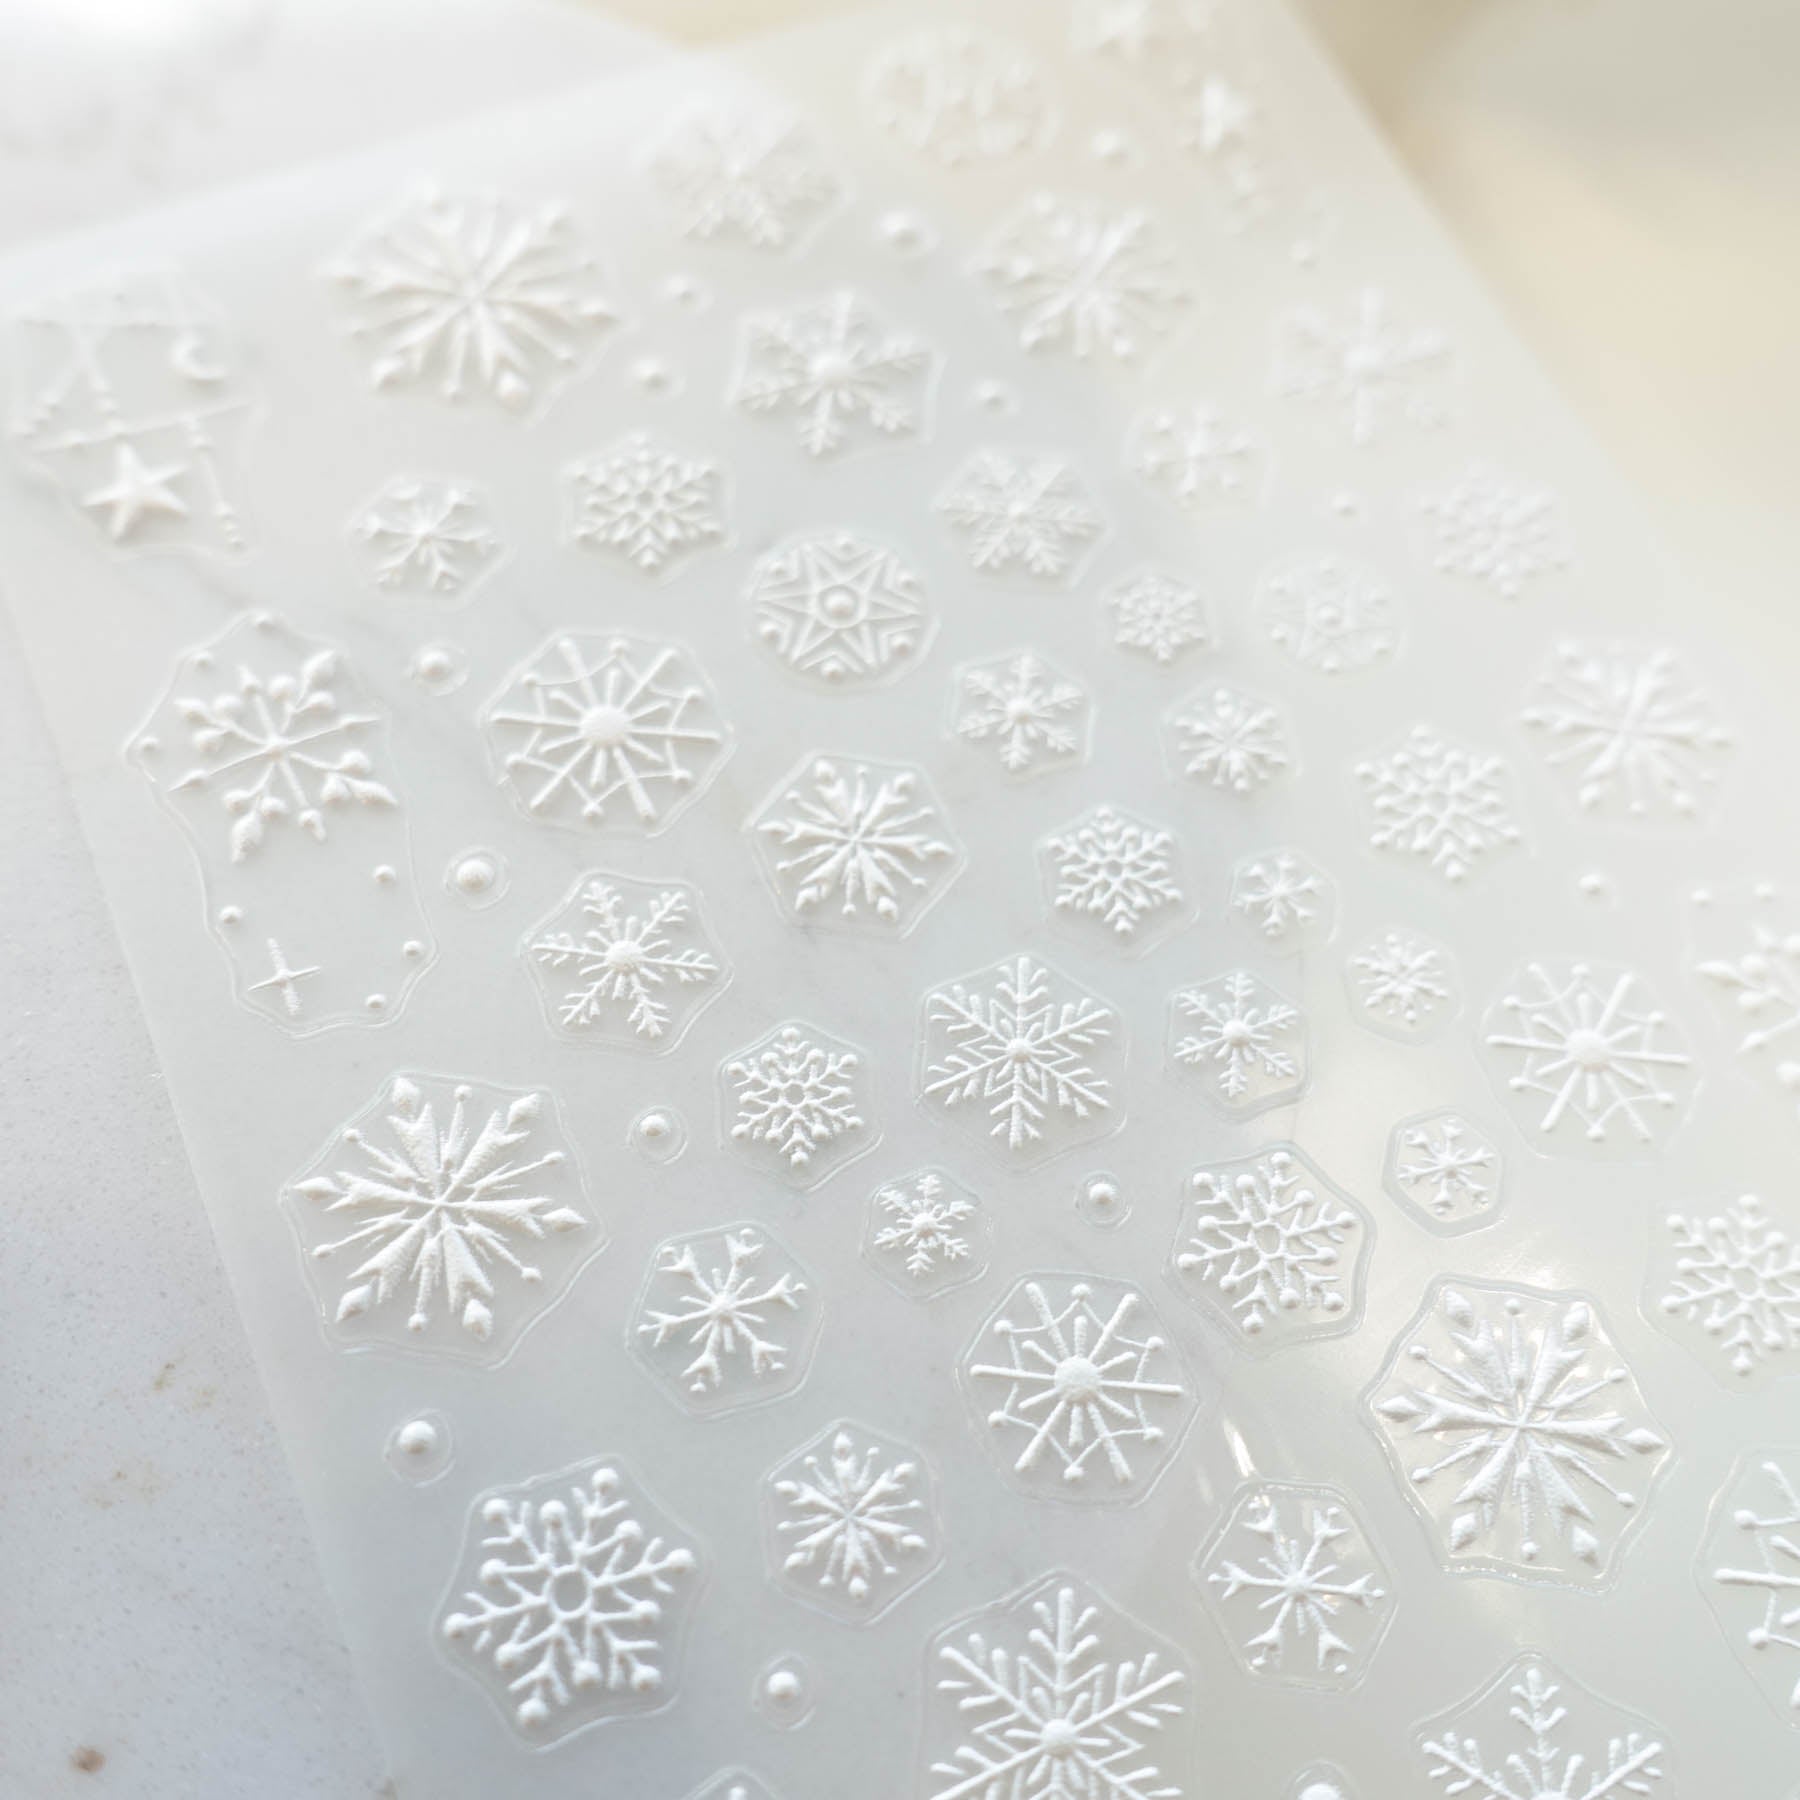 Snowflake 3D Clear-Backed Decorative Stickers Sheet